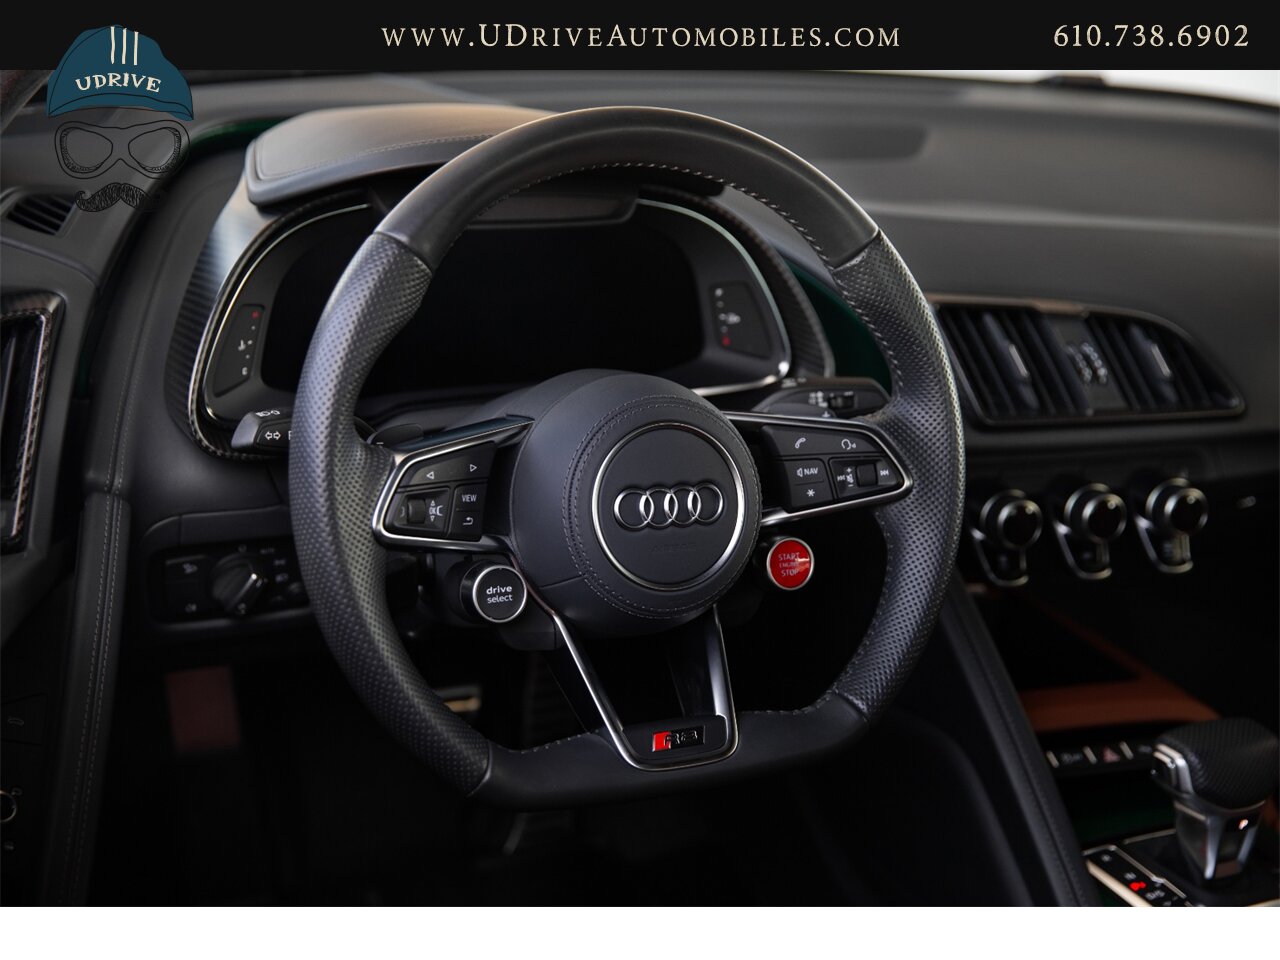 2017 Audi R8 Audi Exclusive Avocado Green Vermont Brown Leather  Diamond Stitching V10 Carbon Fiber - Photo 36 - West Chester, PA 19382